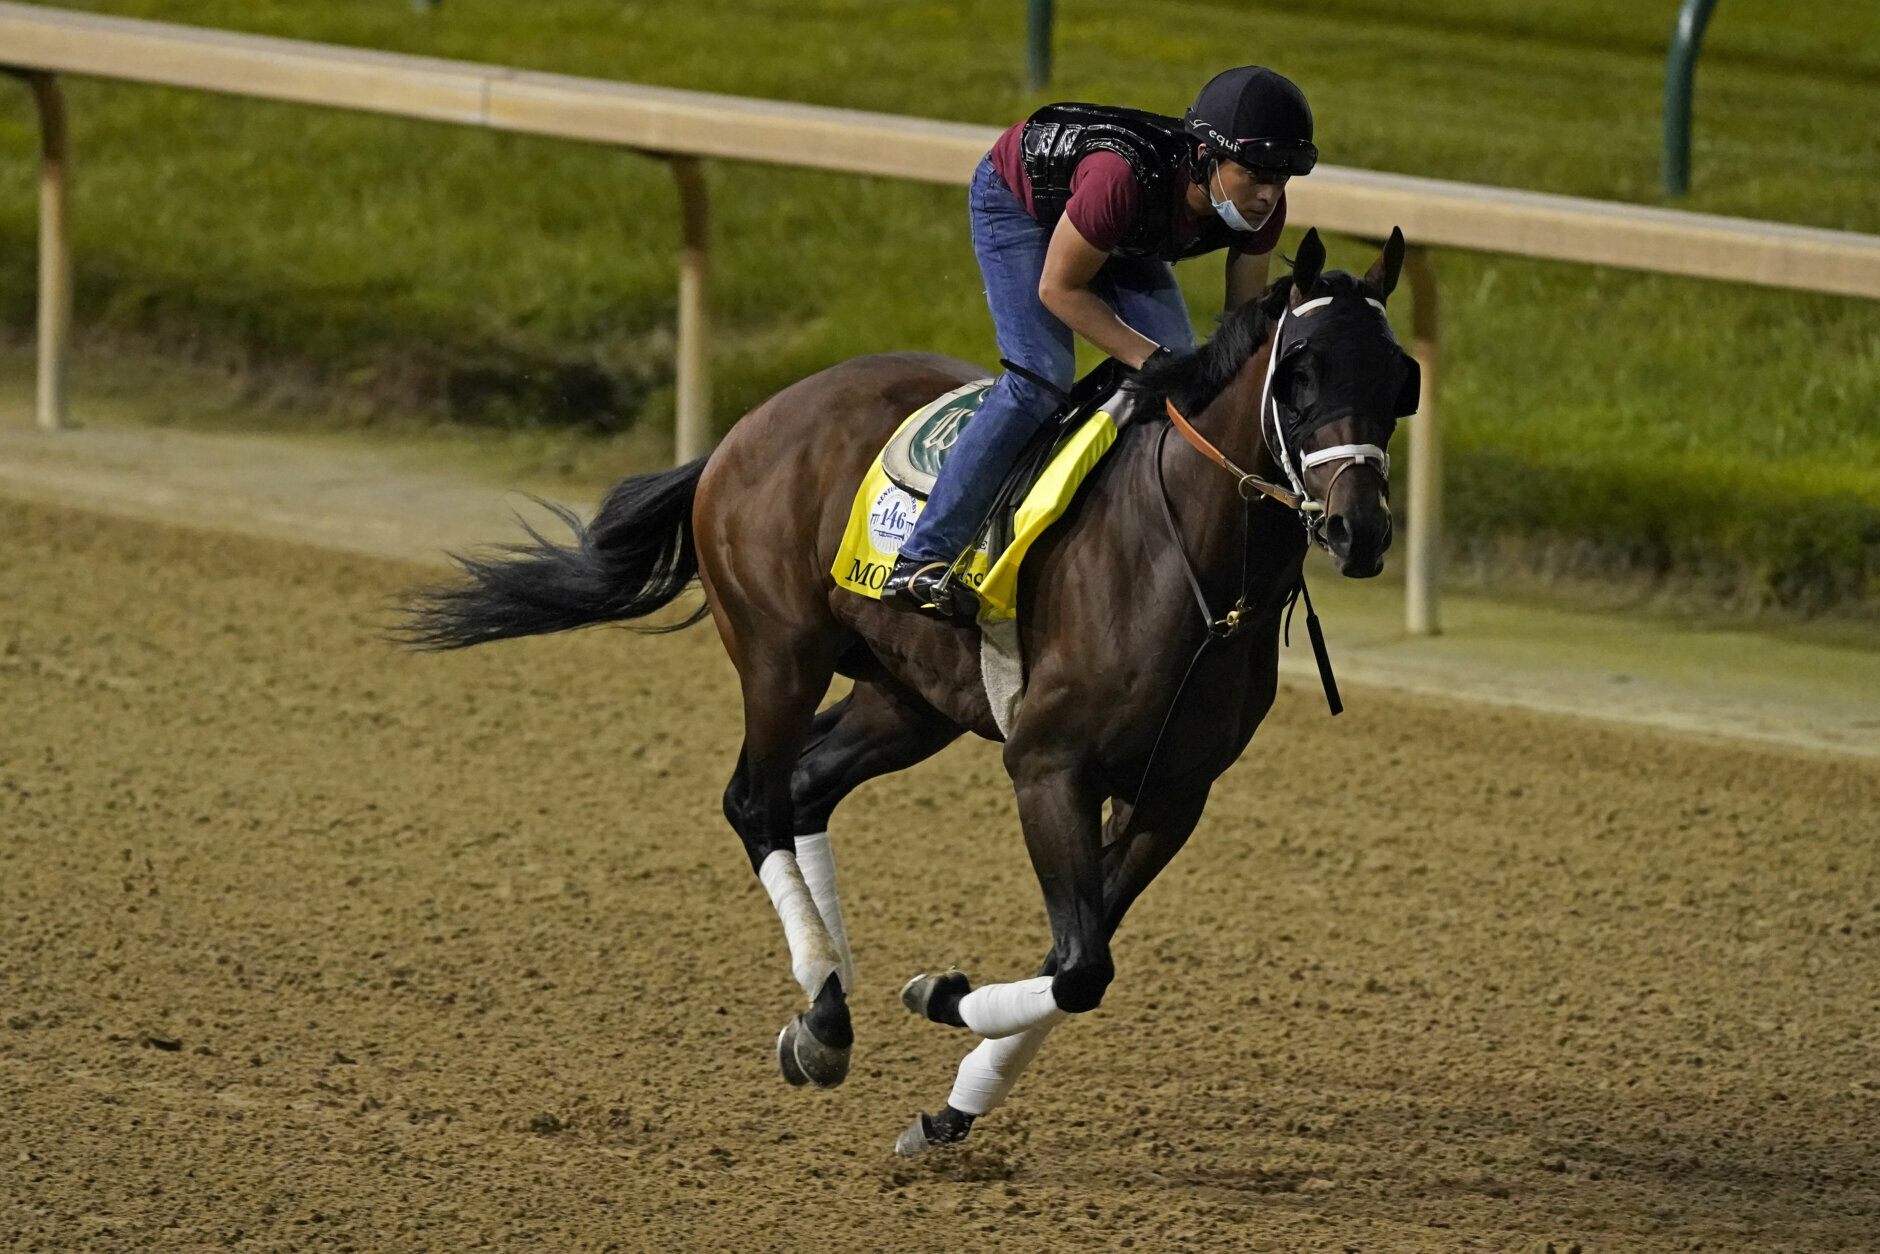 Kentucky Derby entry Money Moves runs during an early-morning workout at Churchill Downs, Friday, Sept. 4, 2020, in Louisville, Ky. The Kentucky Derby is scheduled for Saturday, Sept. 5th. (AP Photo/Charlie Riedel)